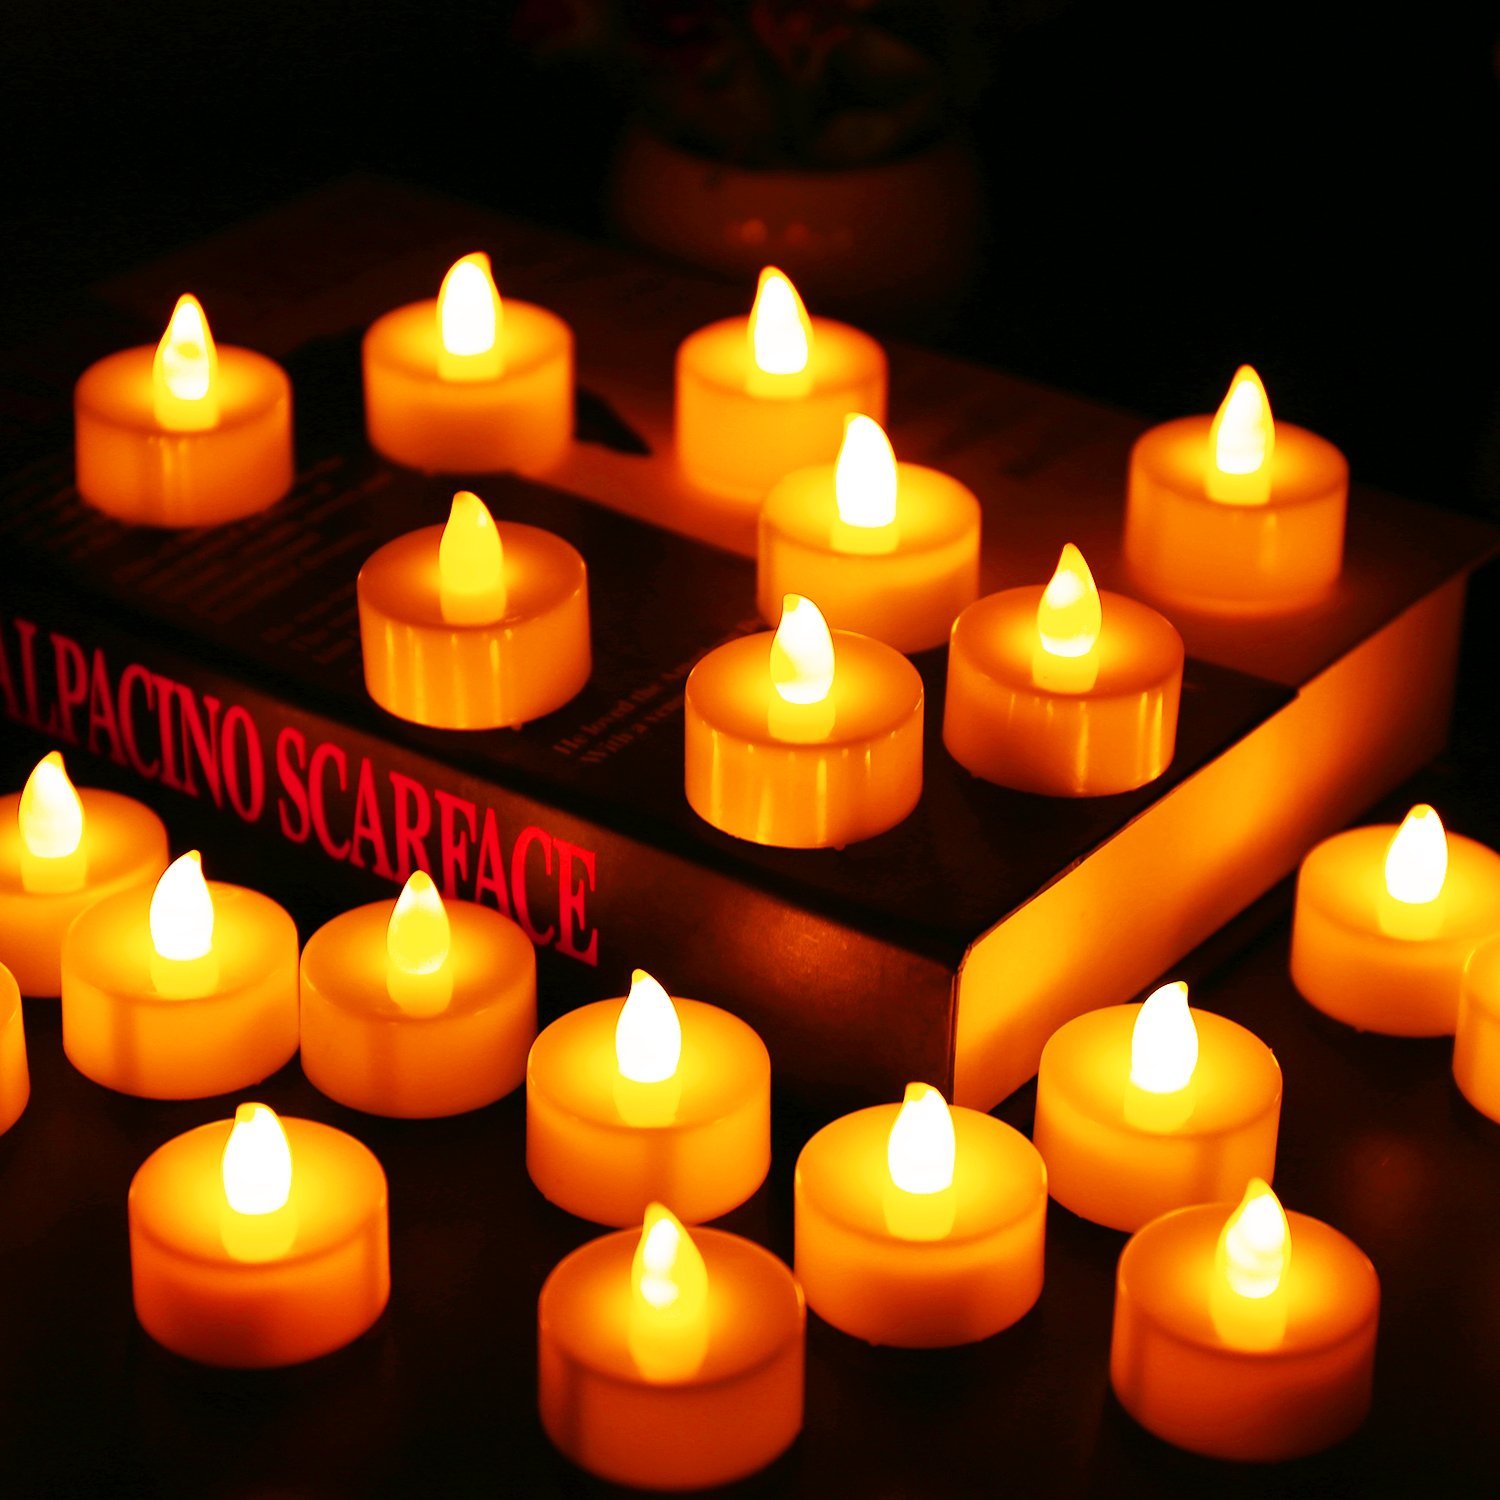 Amazon.com: Flameless Candles, LED Tea Light Candles With Battery ...